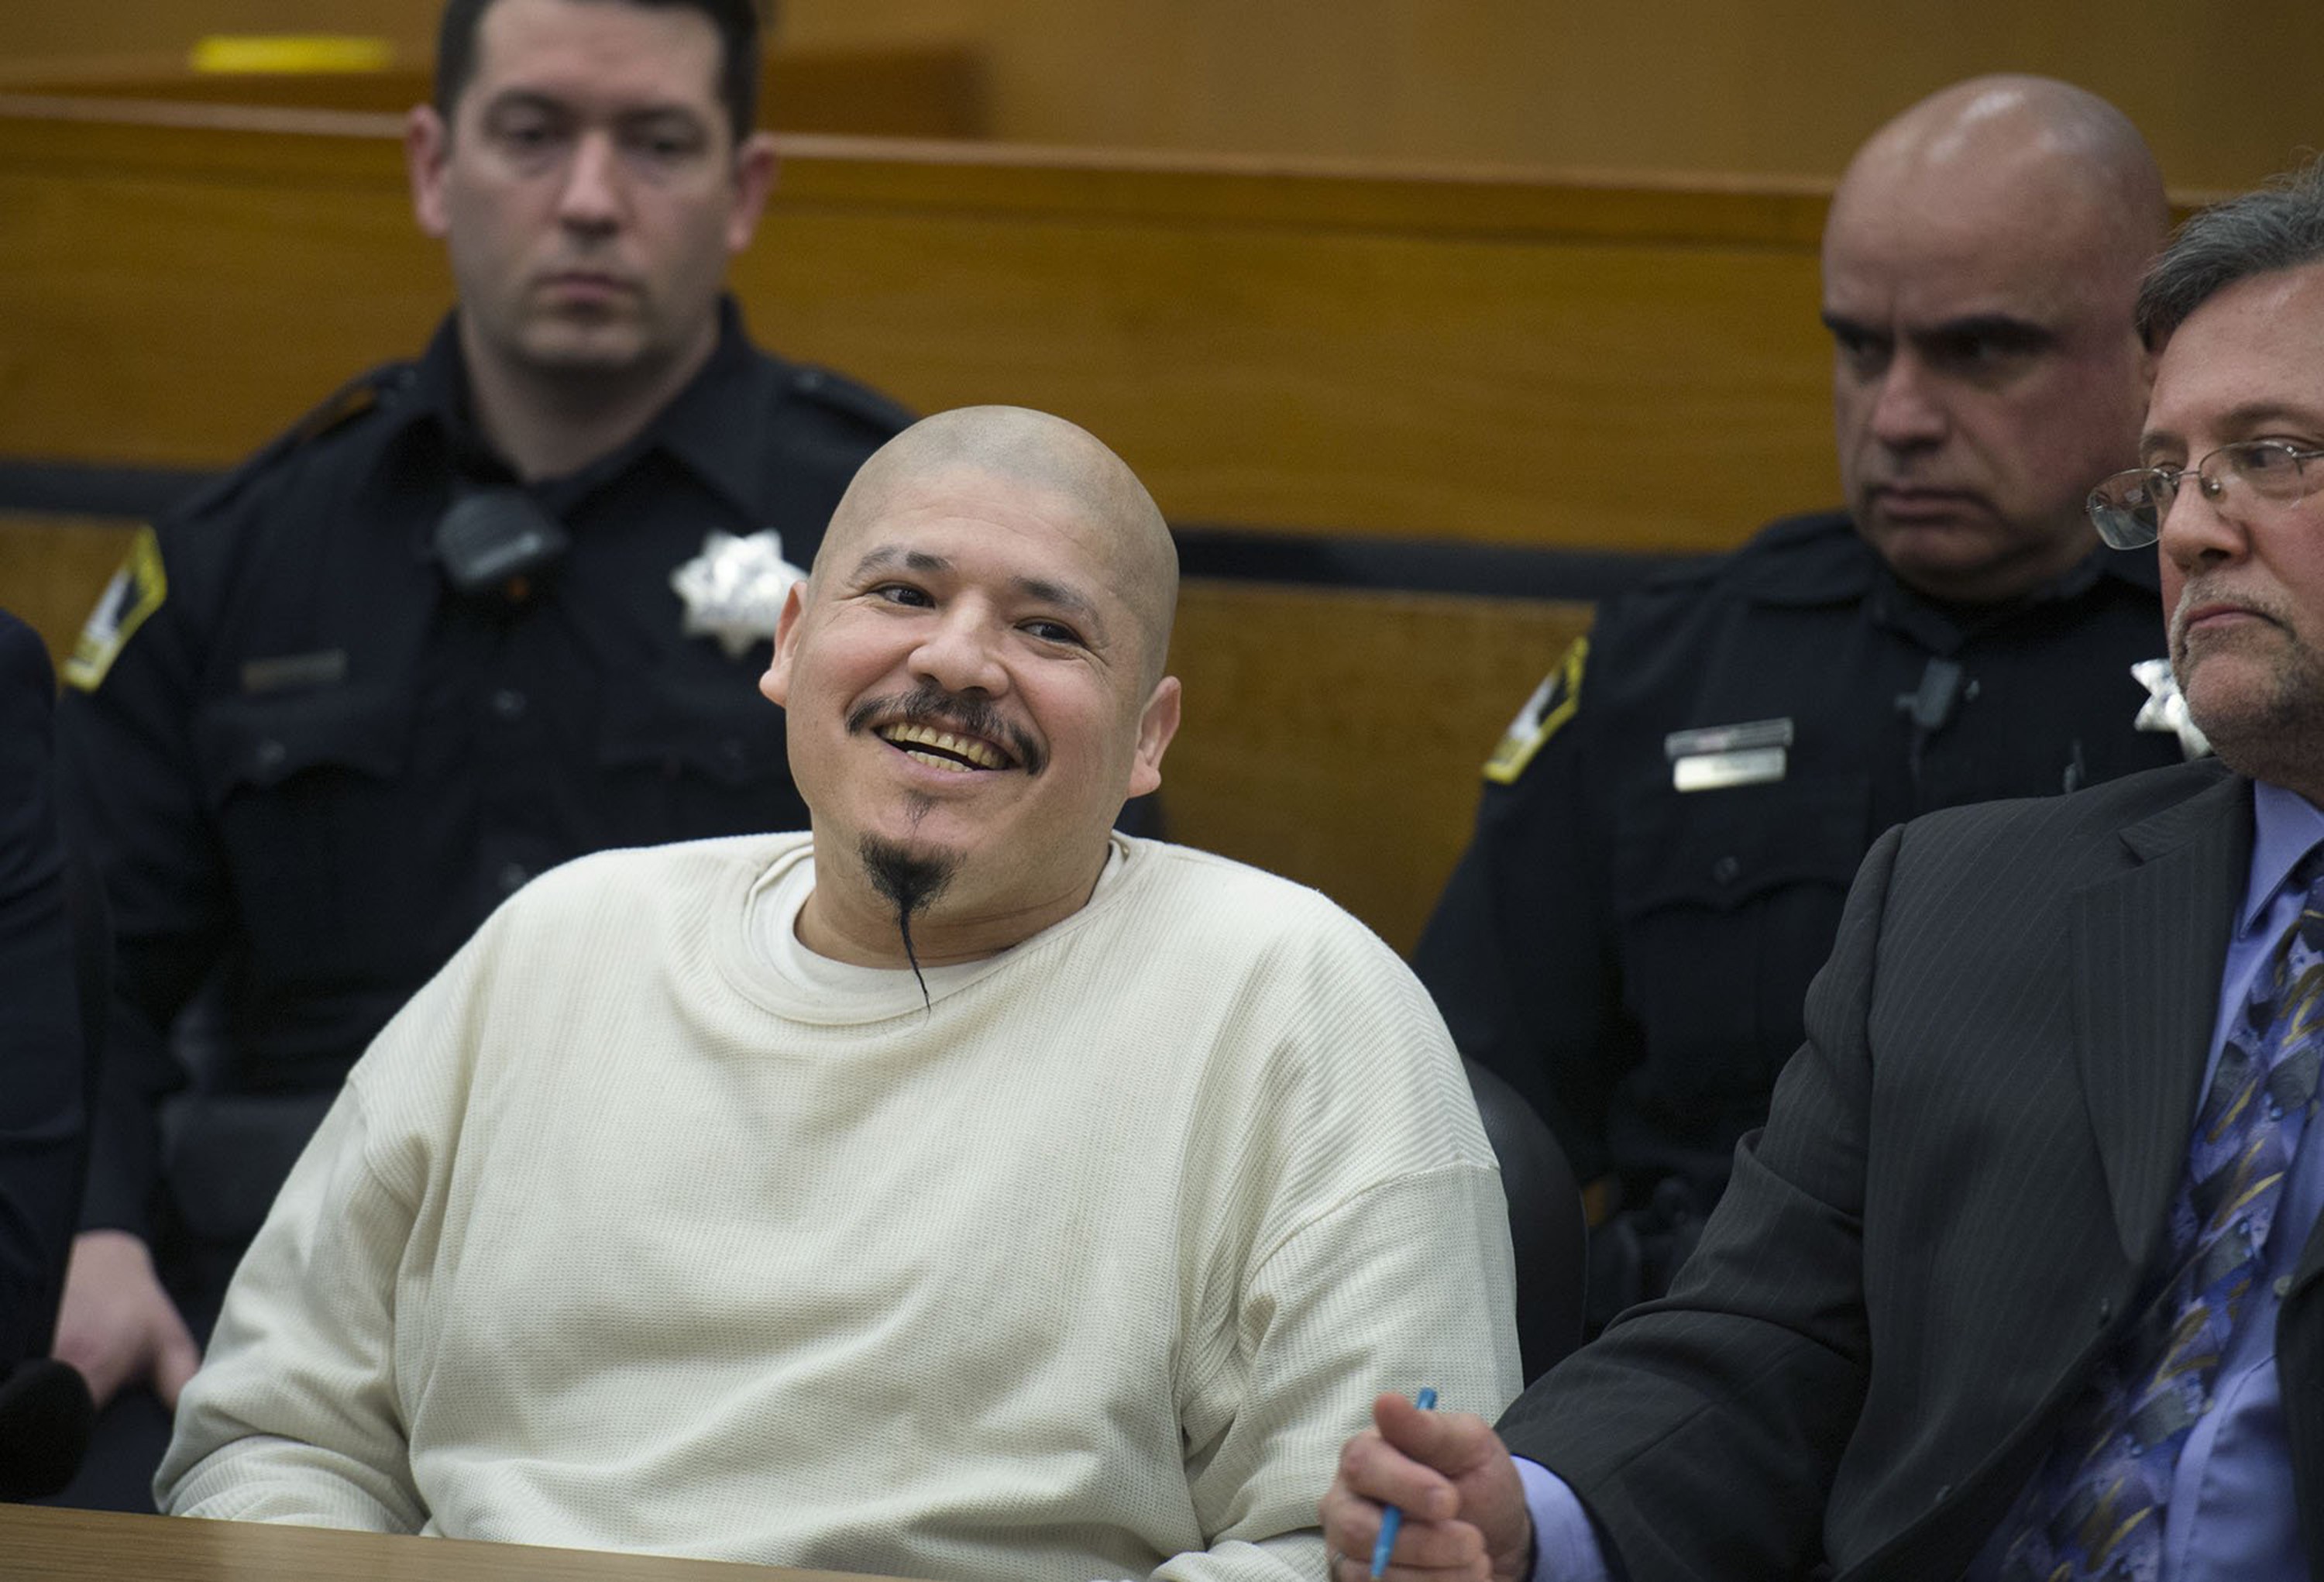 Luis Bracamontes smiles as the verdict is read that he will receive the death penalty in the murders of Sacramento Sheriff's Deputy Danny Oliver and Placer County Detective Michael Davis Jnr on March 27, 2018 in Sacramento, California. Photo: TNS